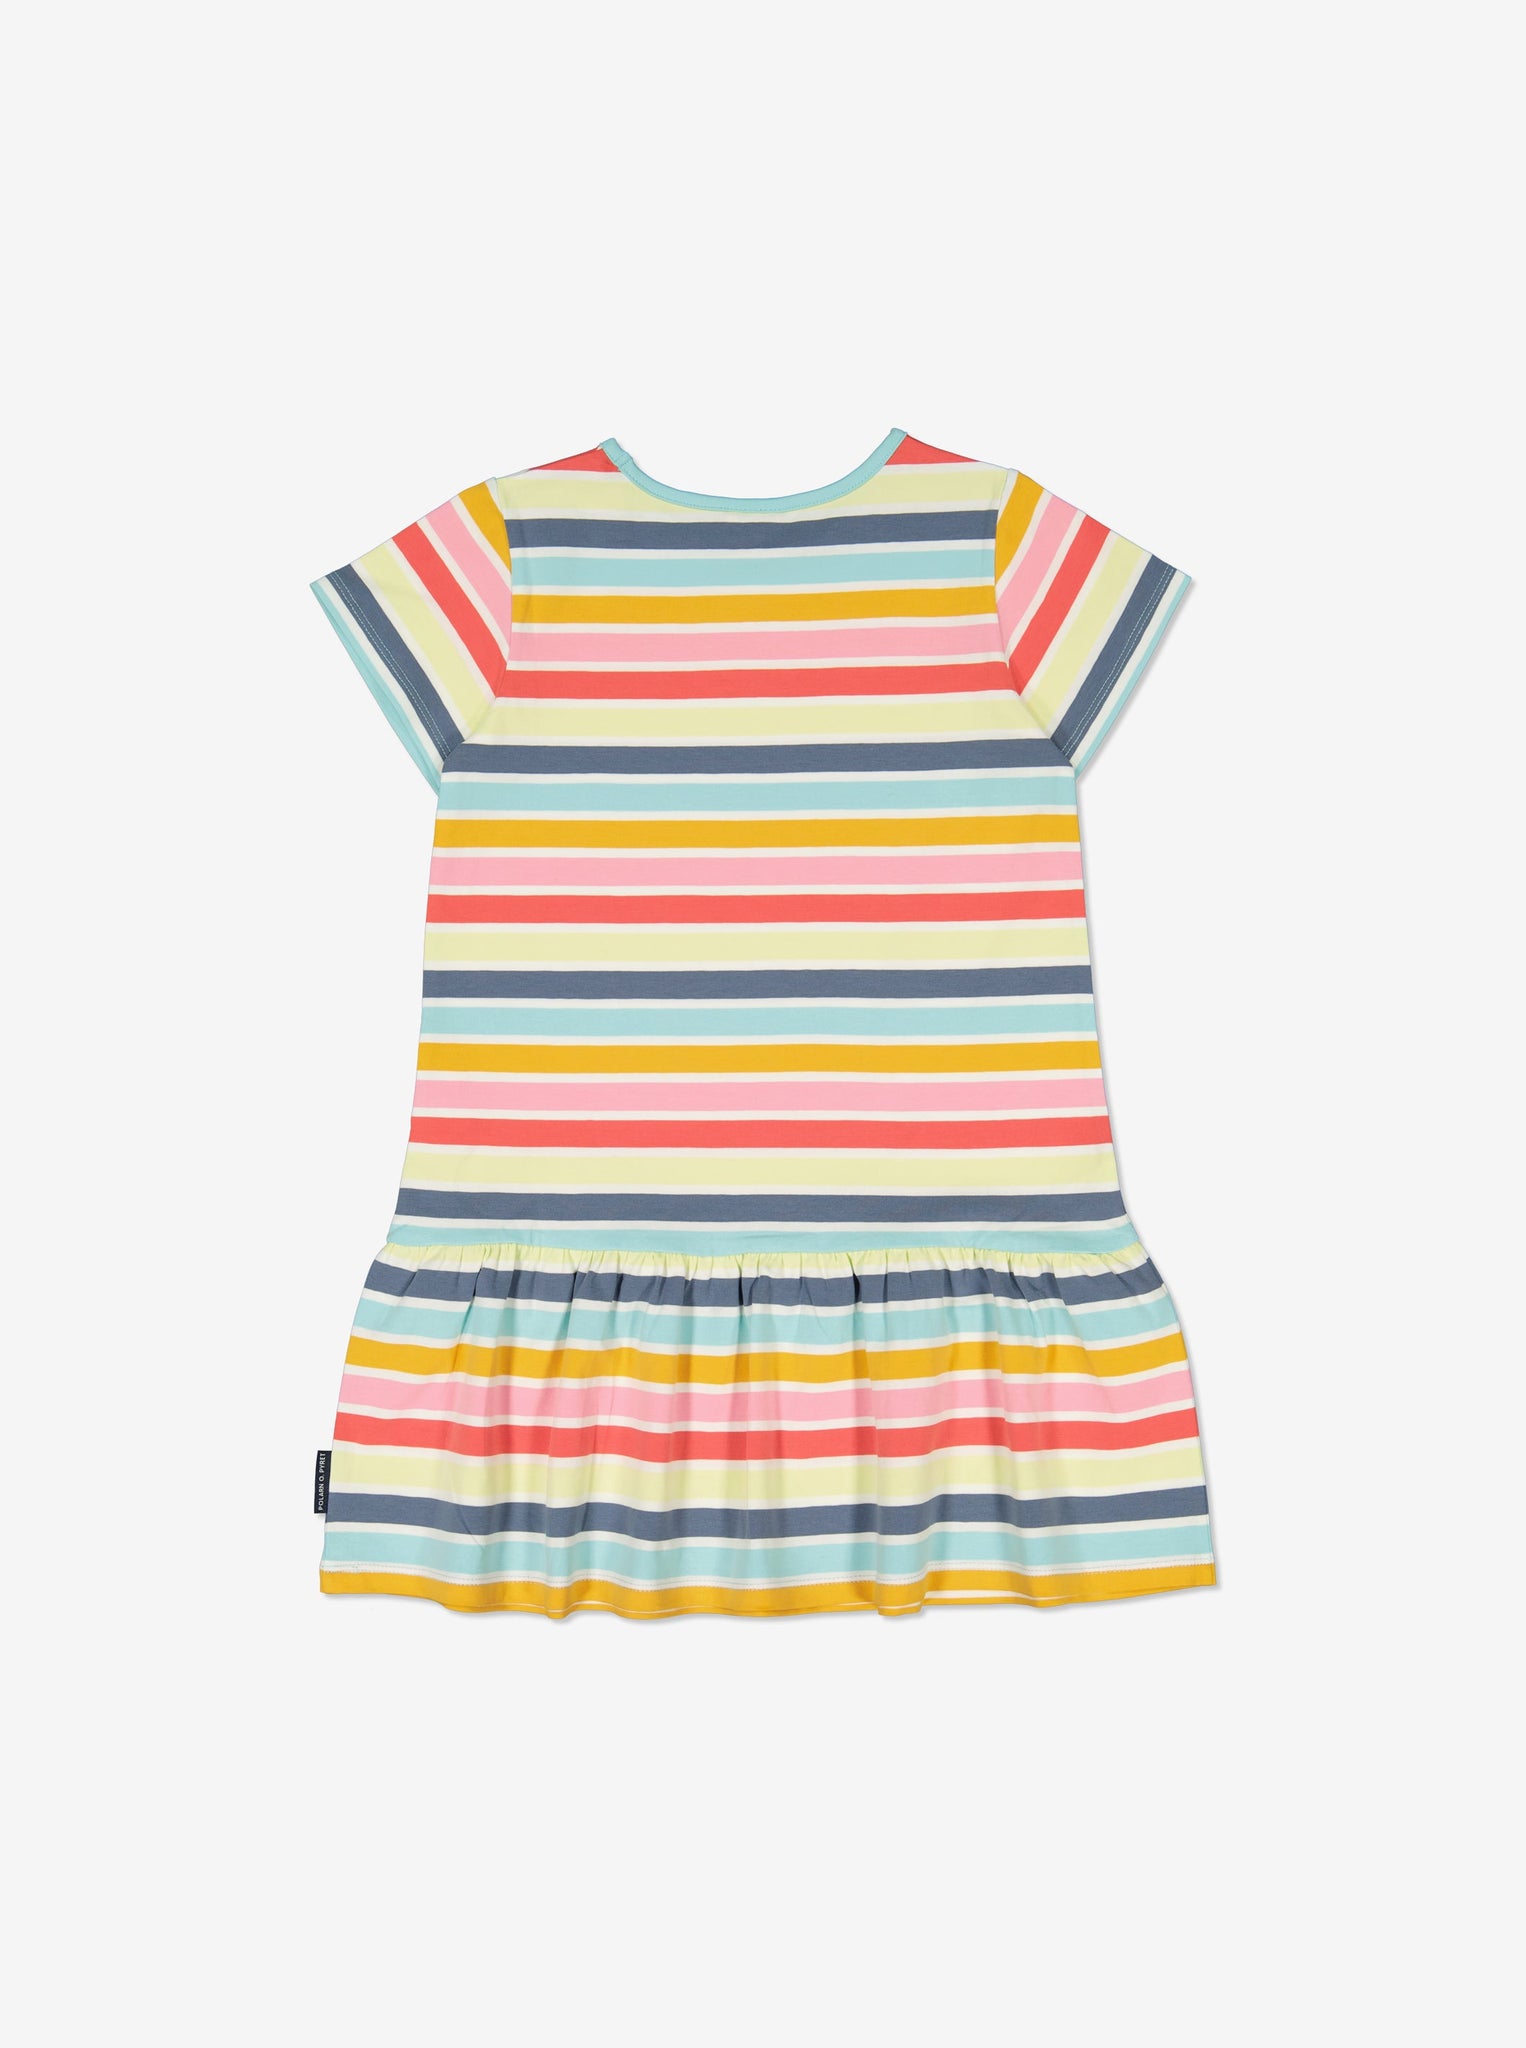 Organic Cotton Striped Girls Dress from Polarn O. Pyret Kidswear. Made using sustainable sourced materials.